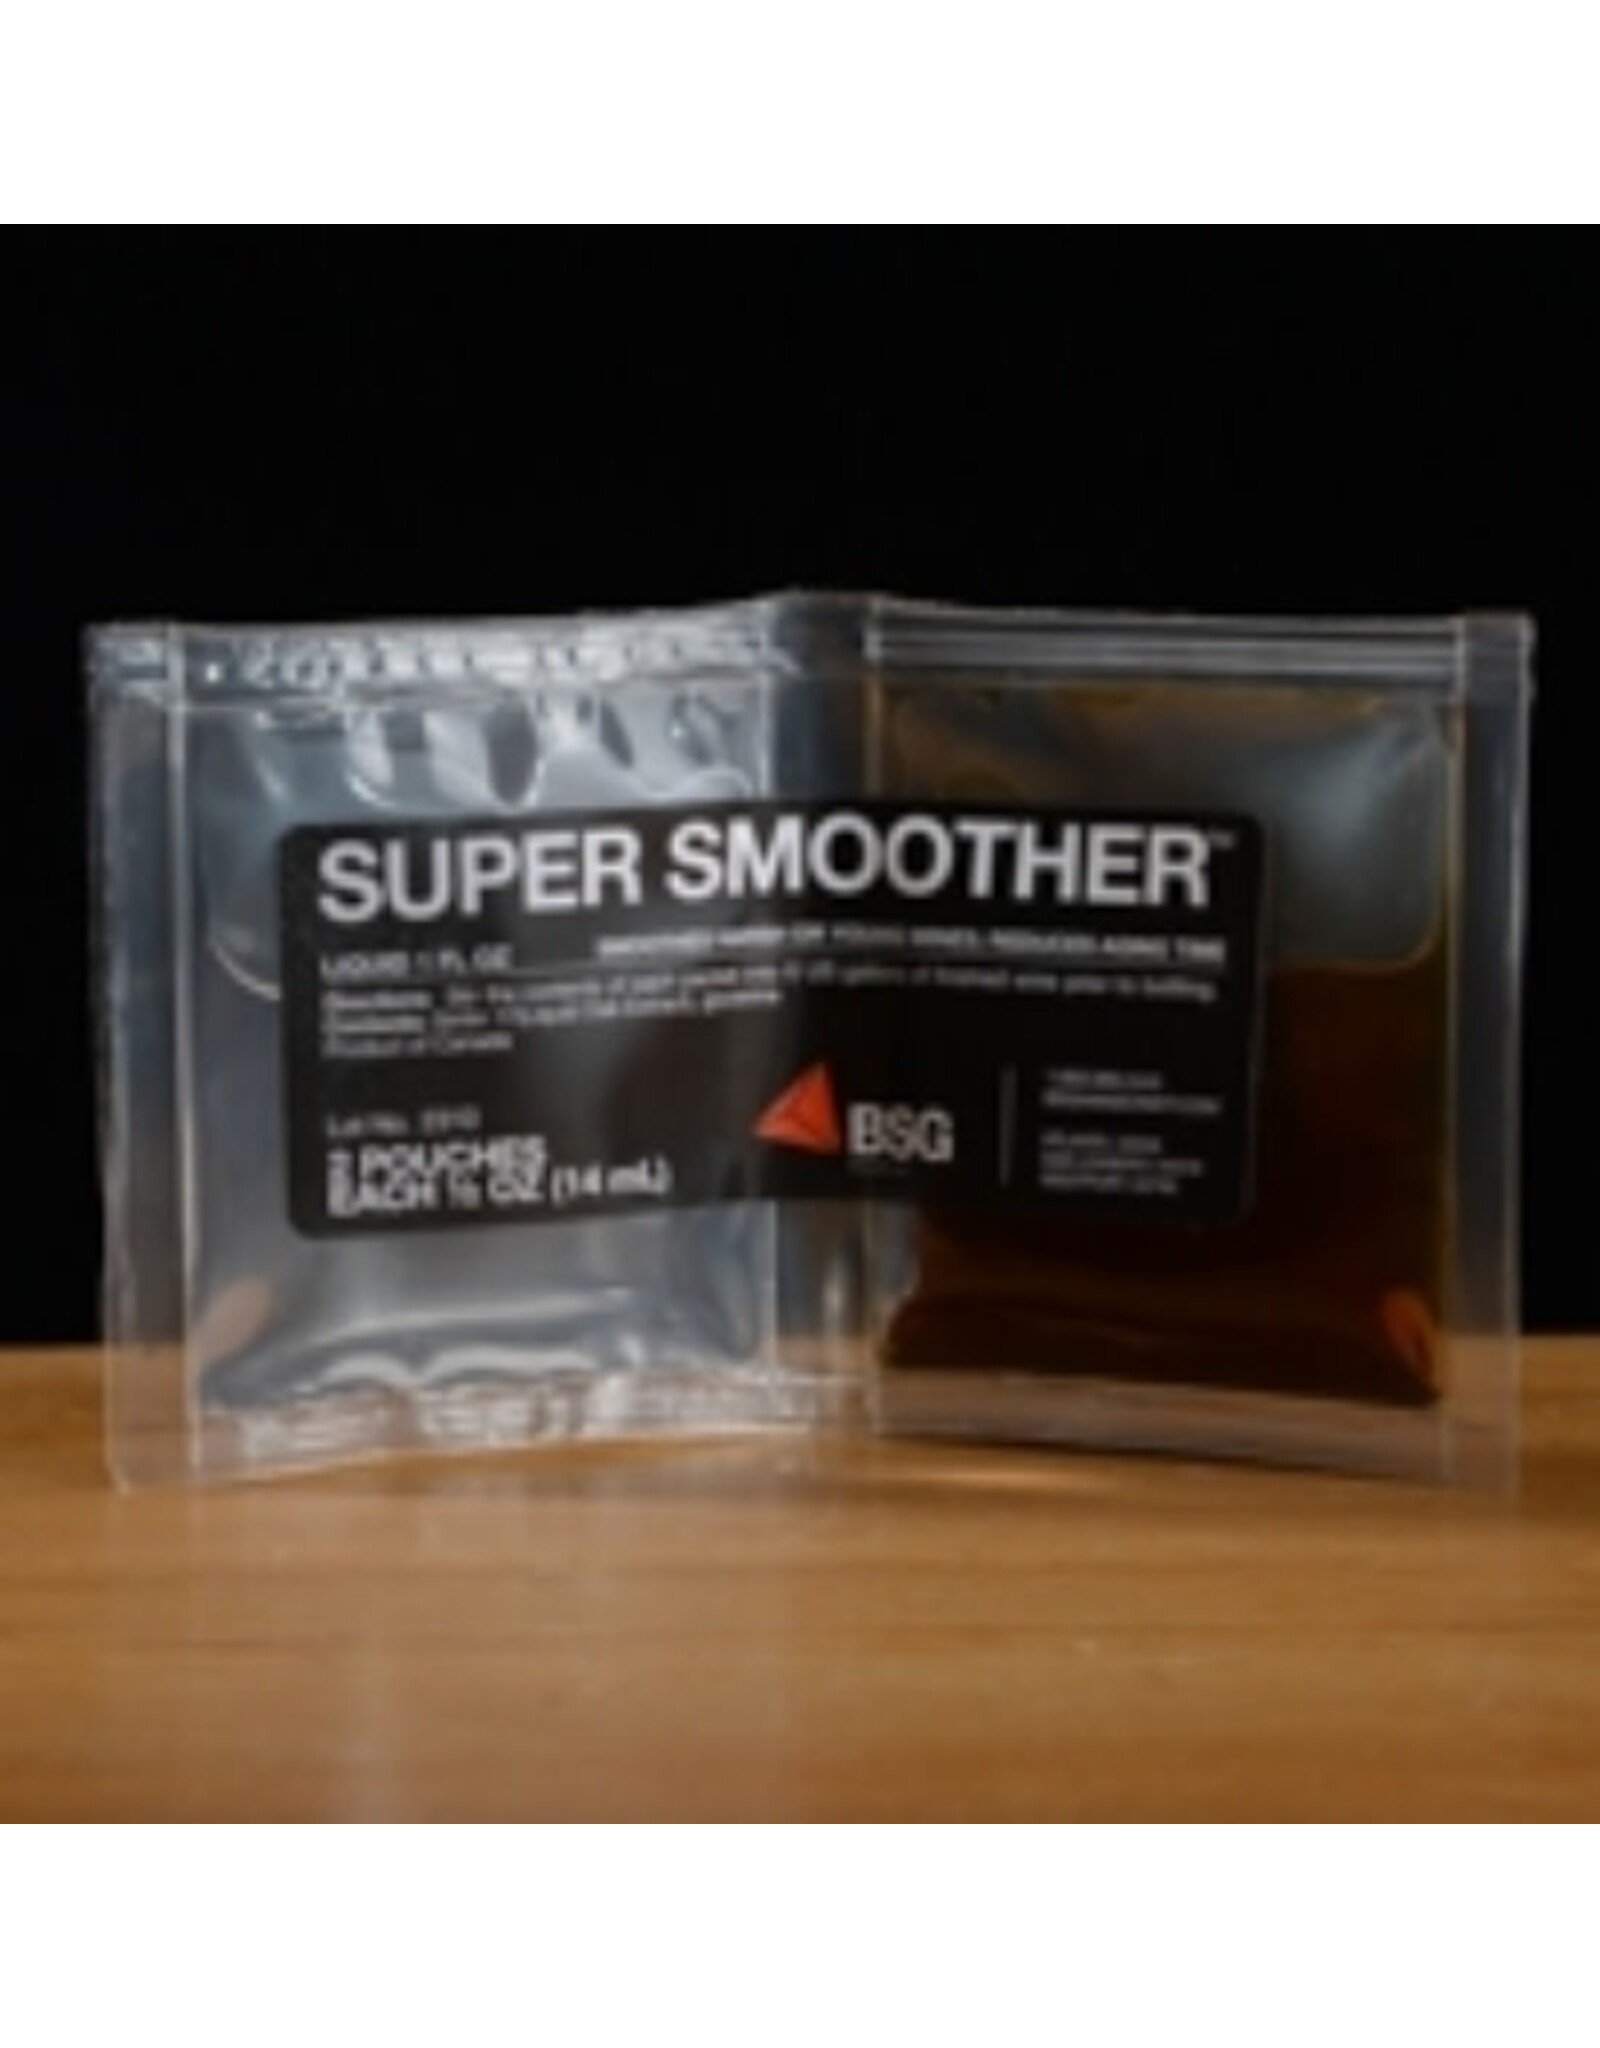 Super-smoother